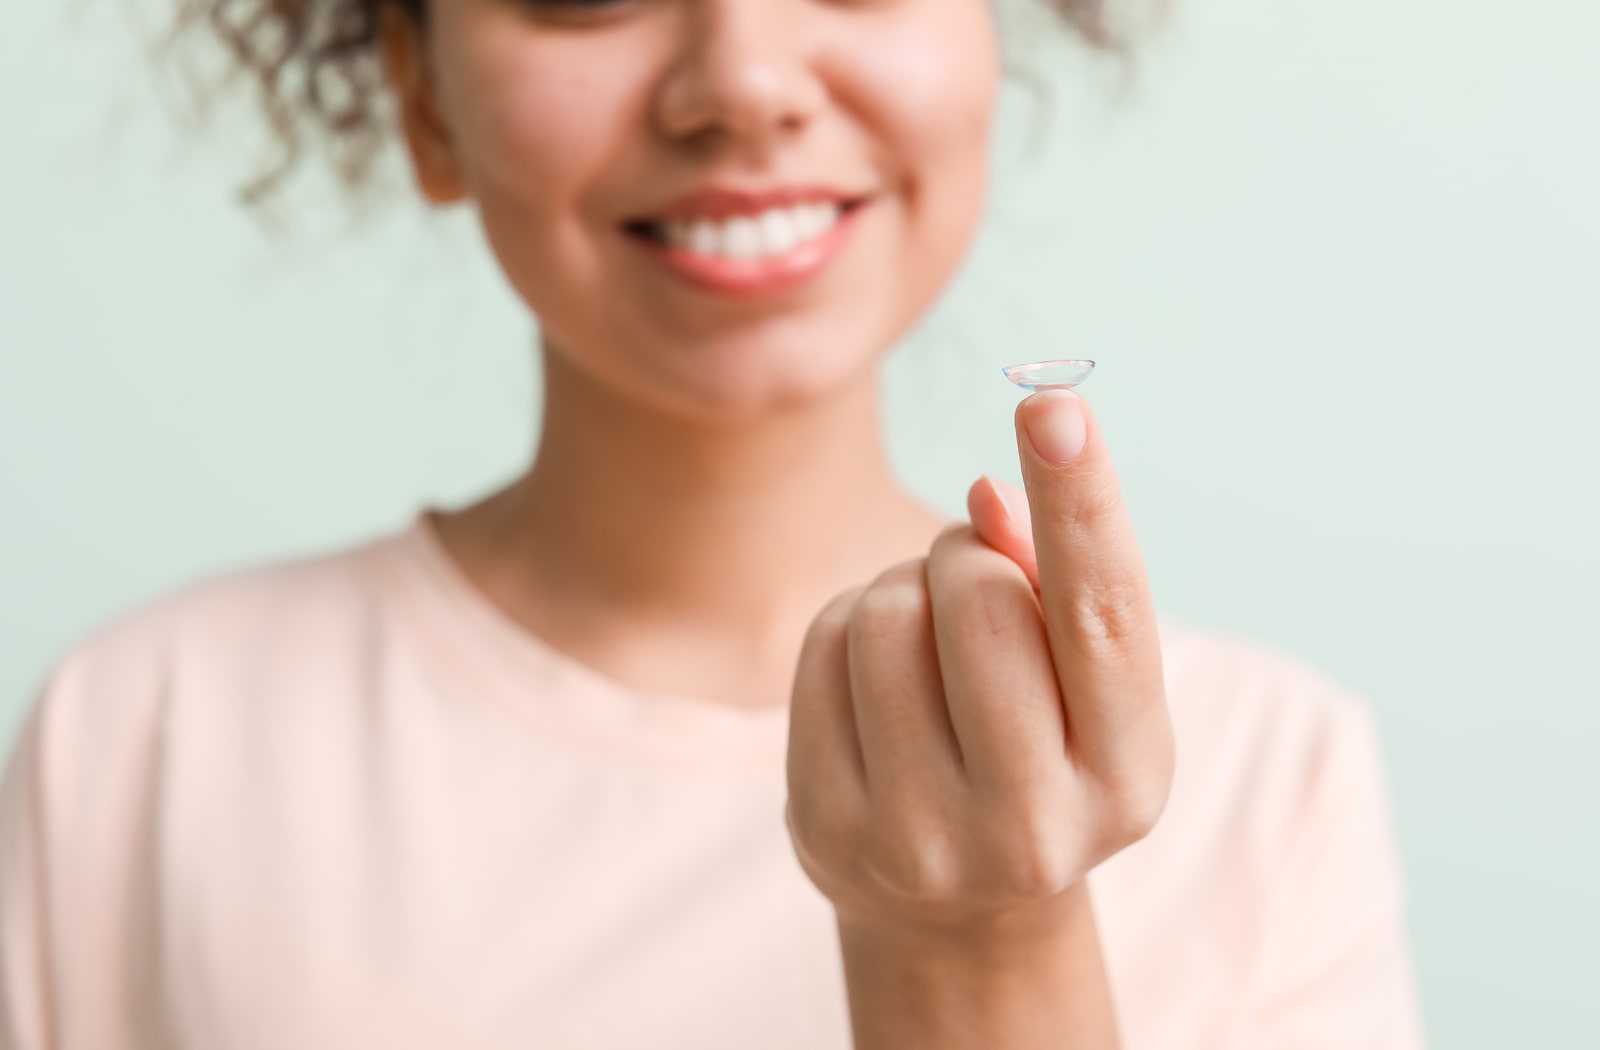 A young woman holding a contact lens on her index finger